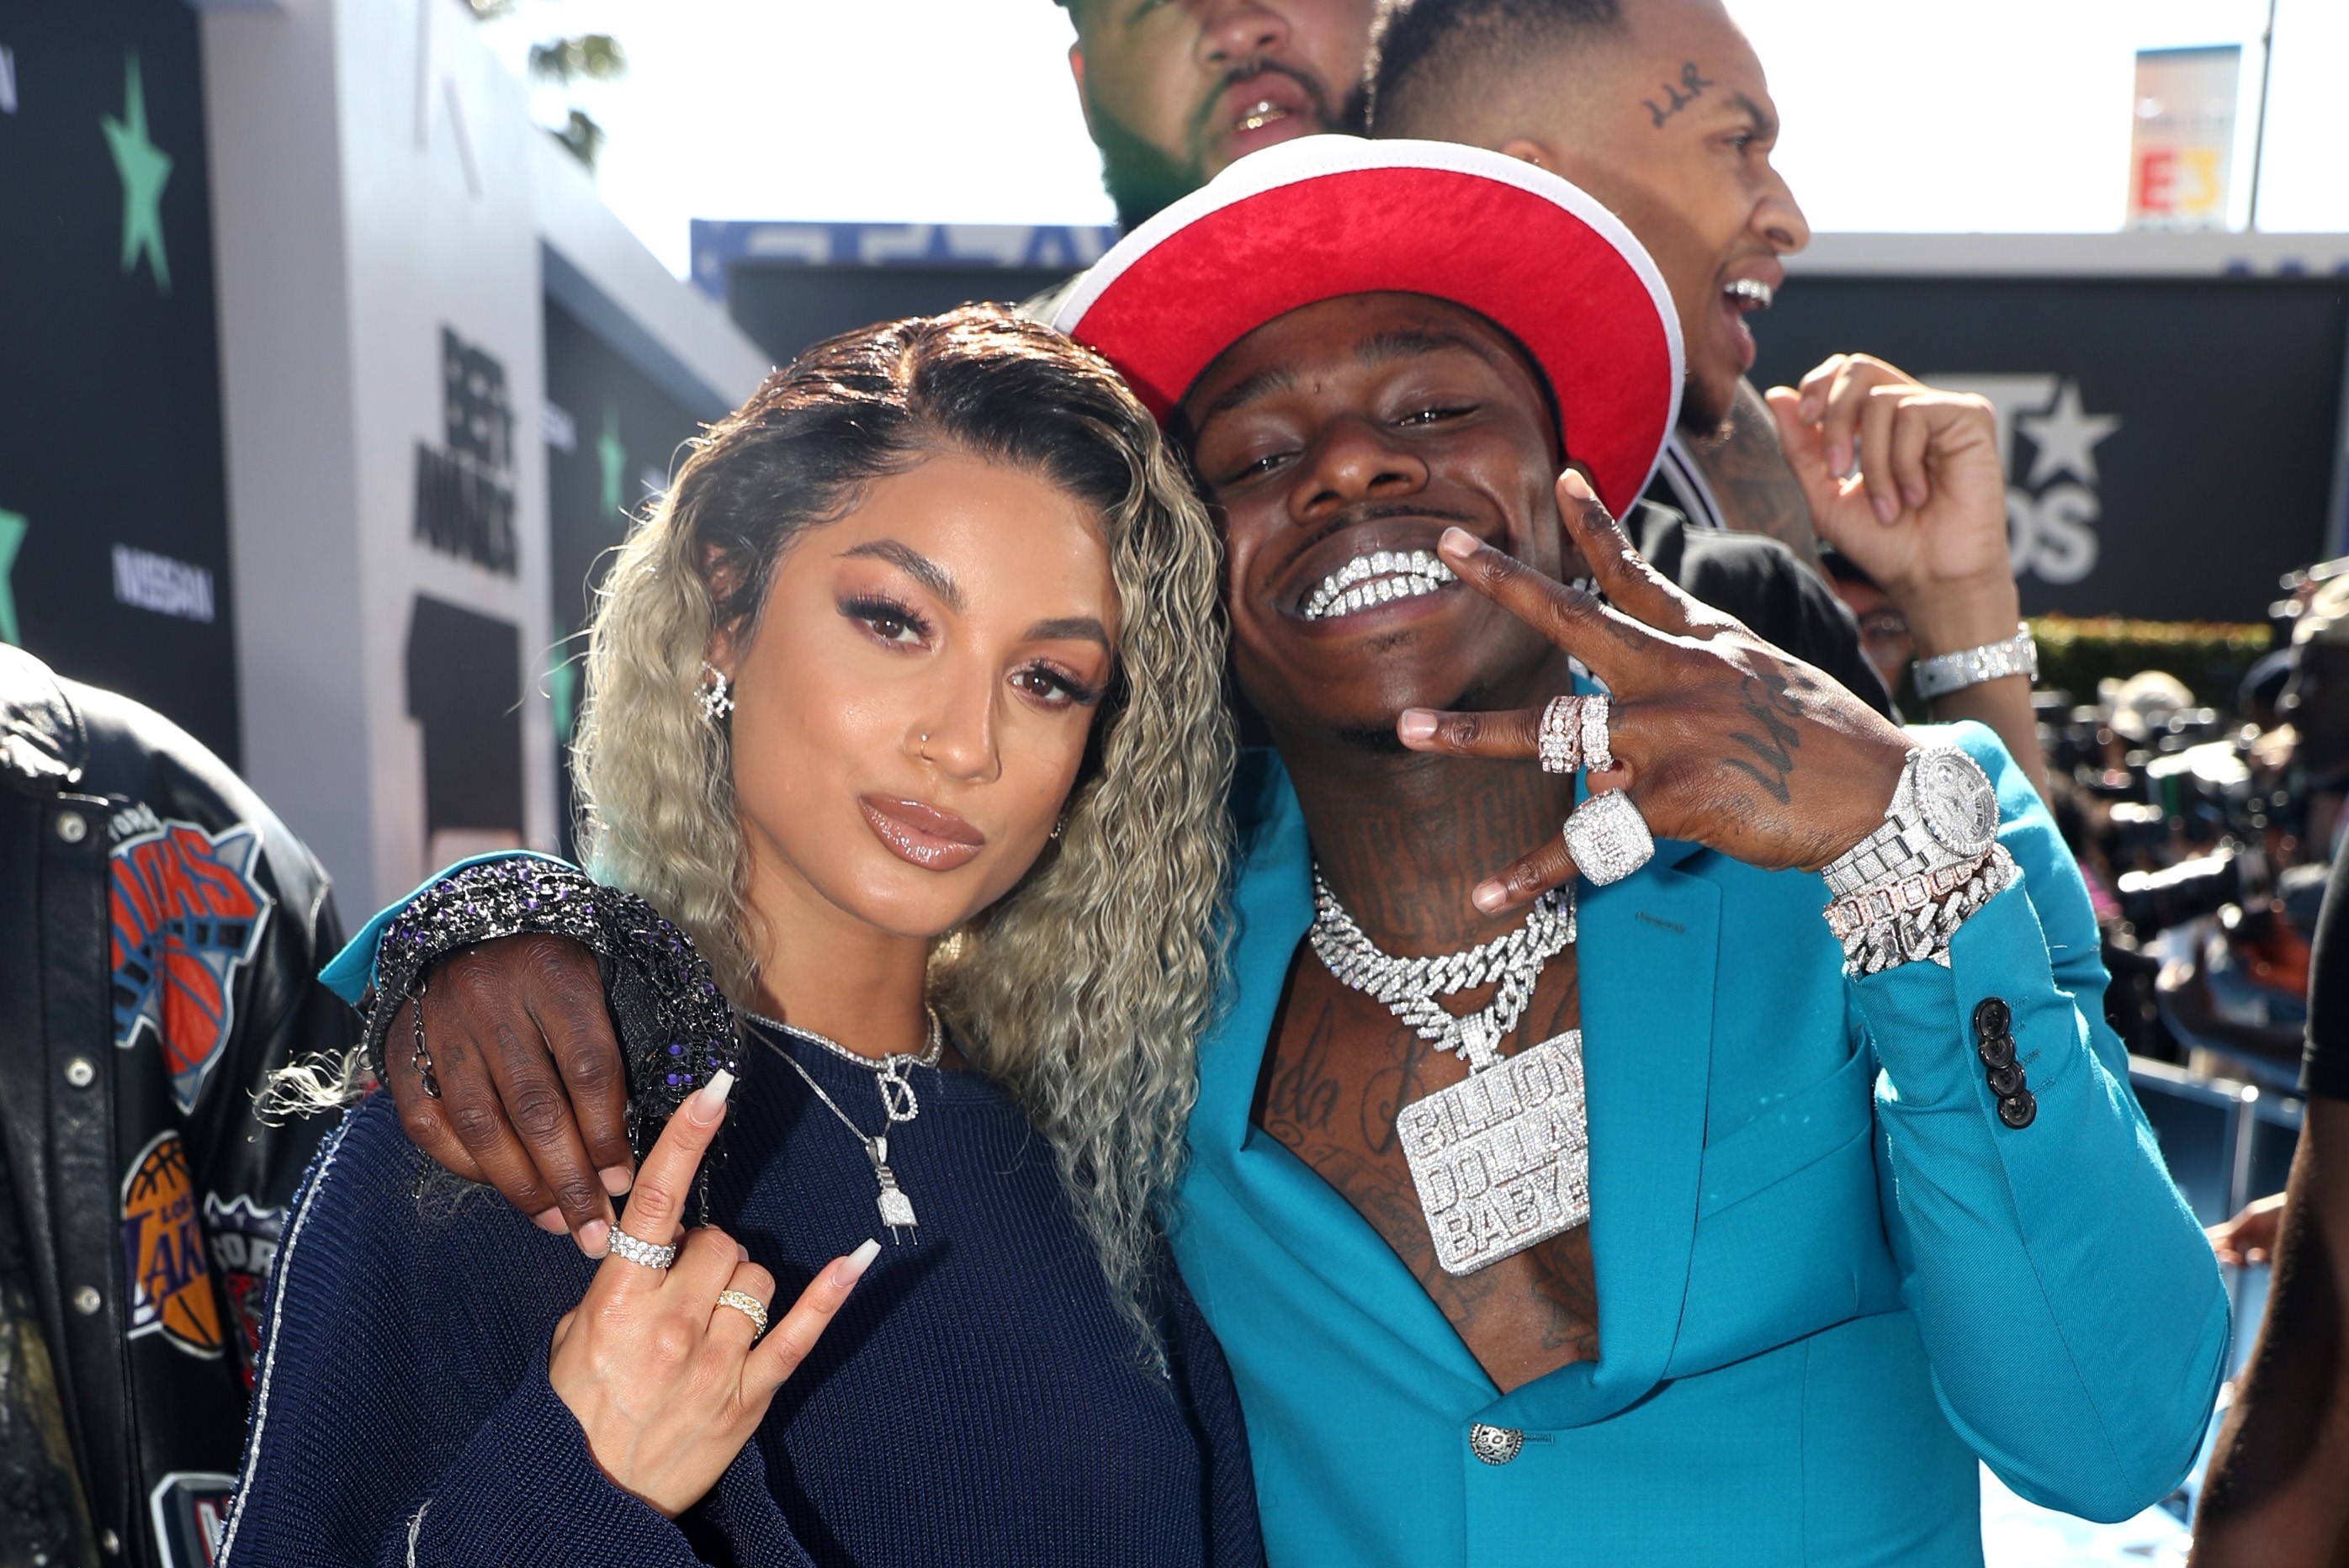 DaniLeigh charged with assault after altercation with DaBaby